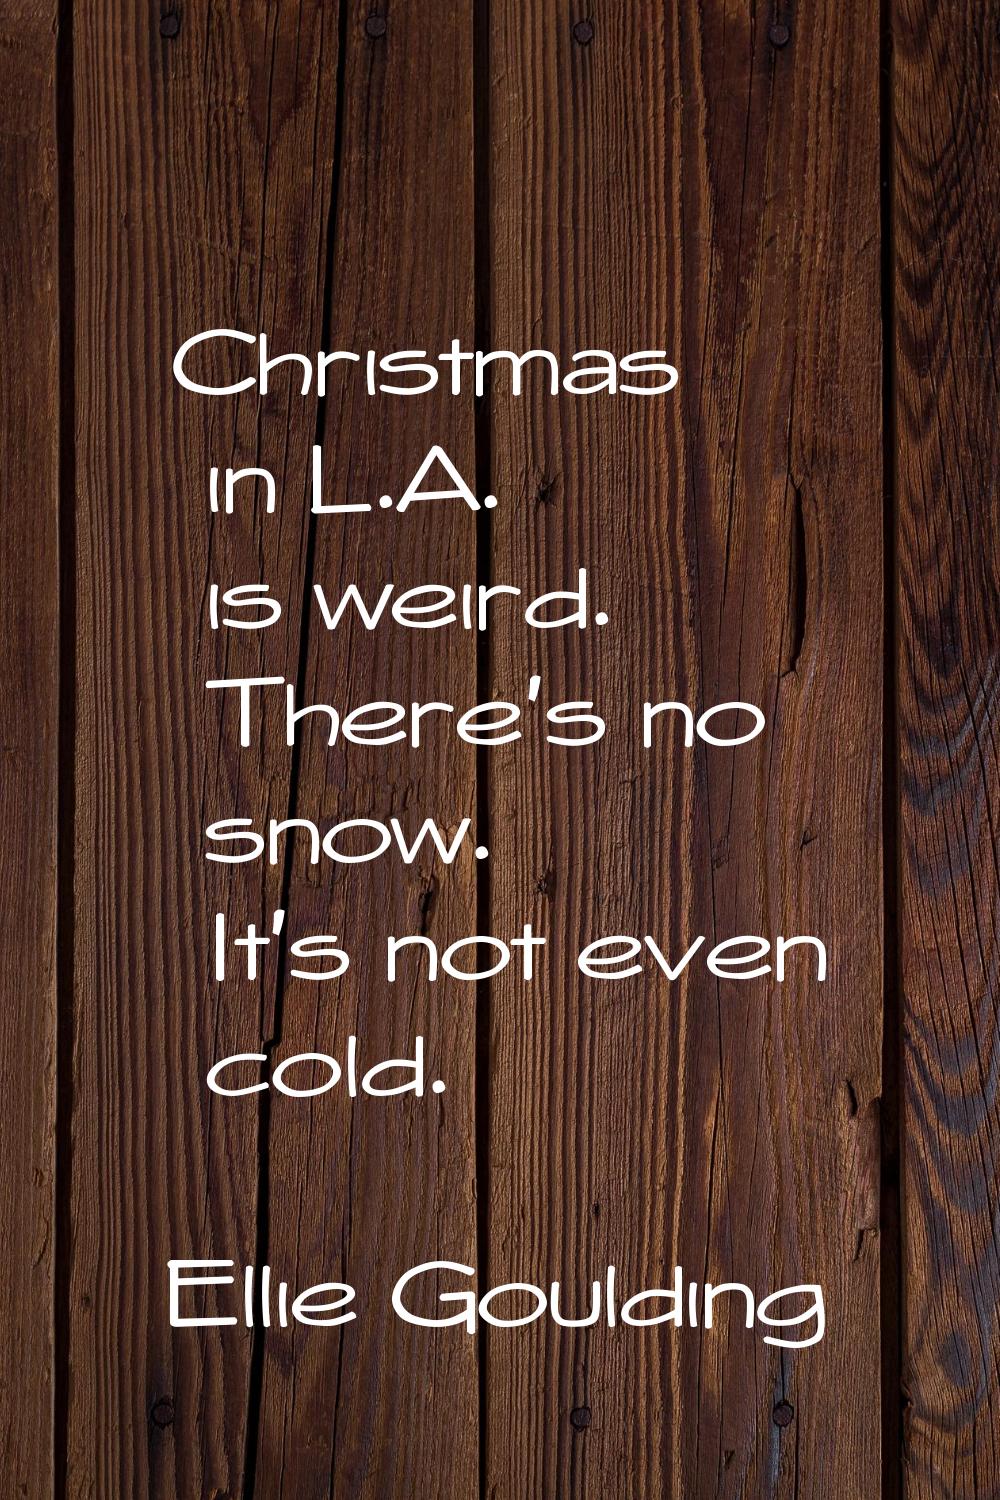 Christmas in L.A. is weird. There's no snow. It's not even cold.